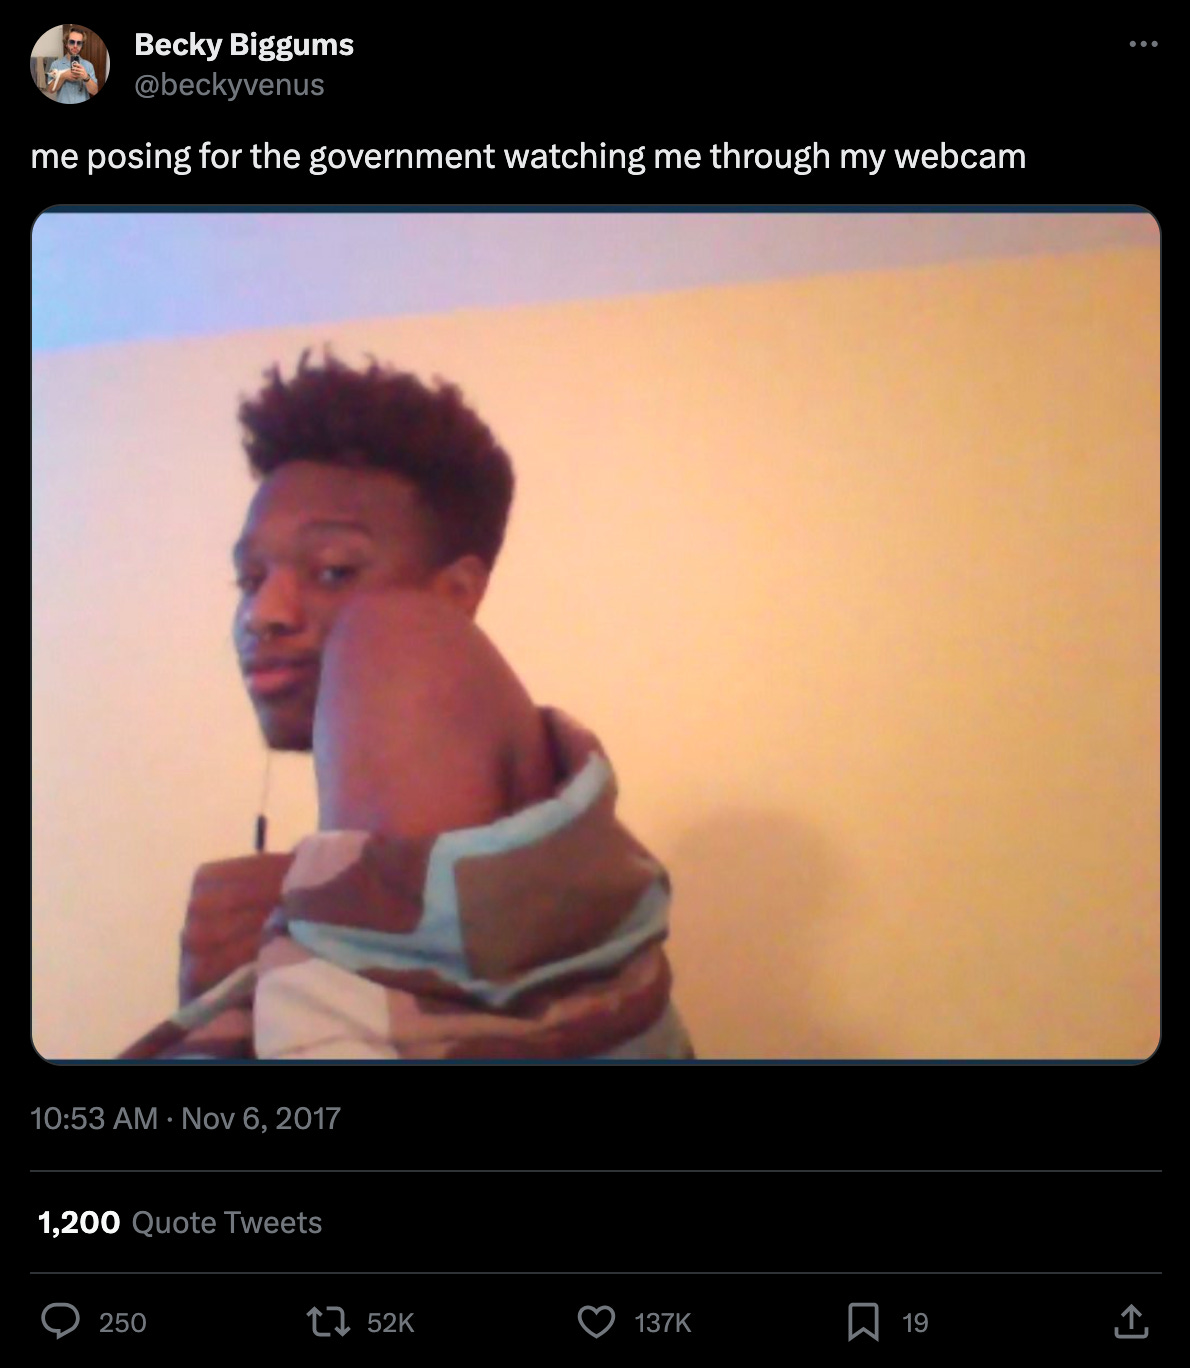 Tweet: "me posing for the government watching me through my webcam" with an image of a man baring his shoulder 